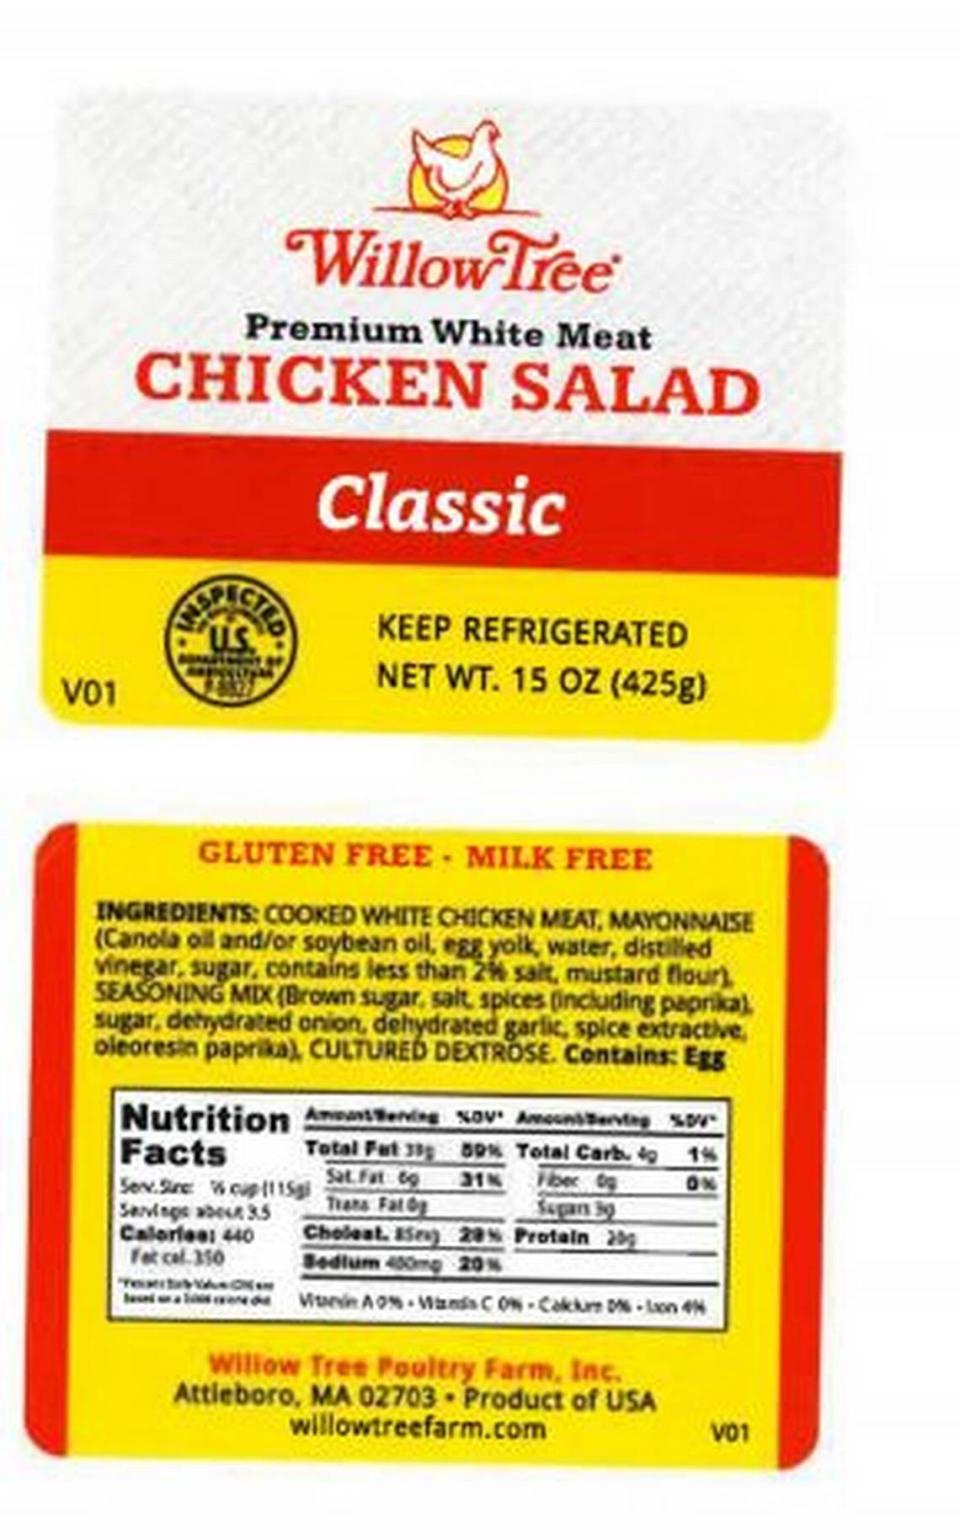 The label on recalled Willow Tree Premium White Meat Chicken Salad Classic